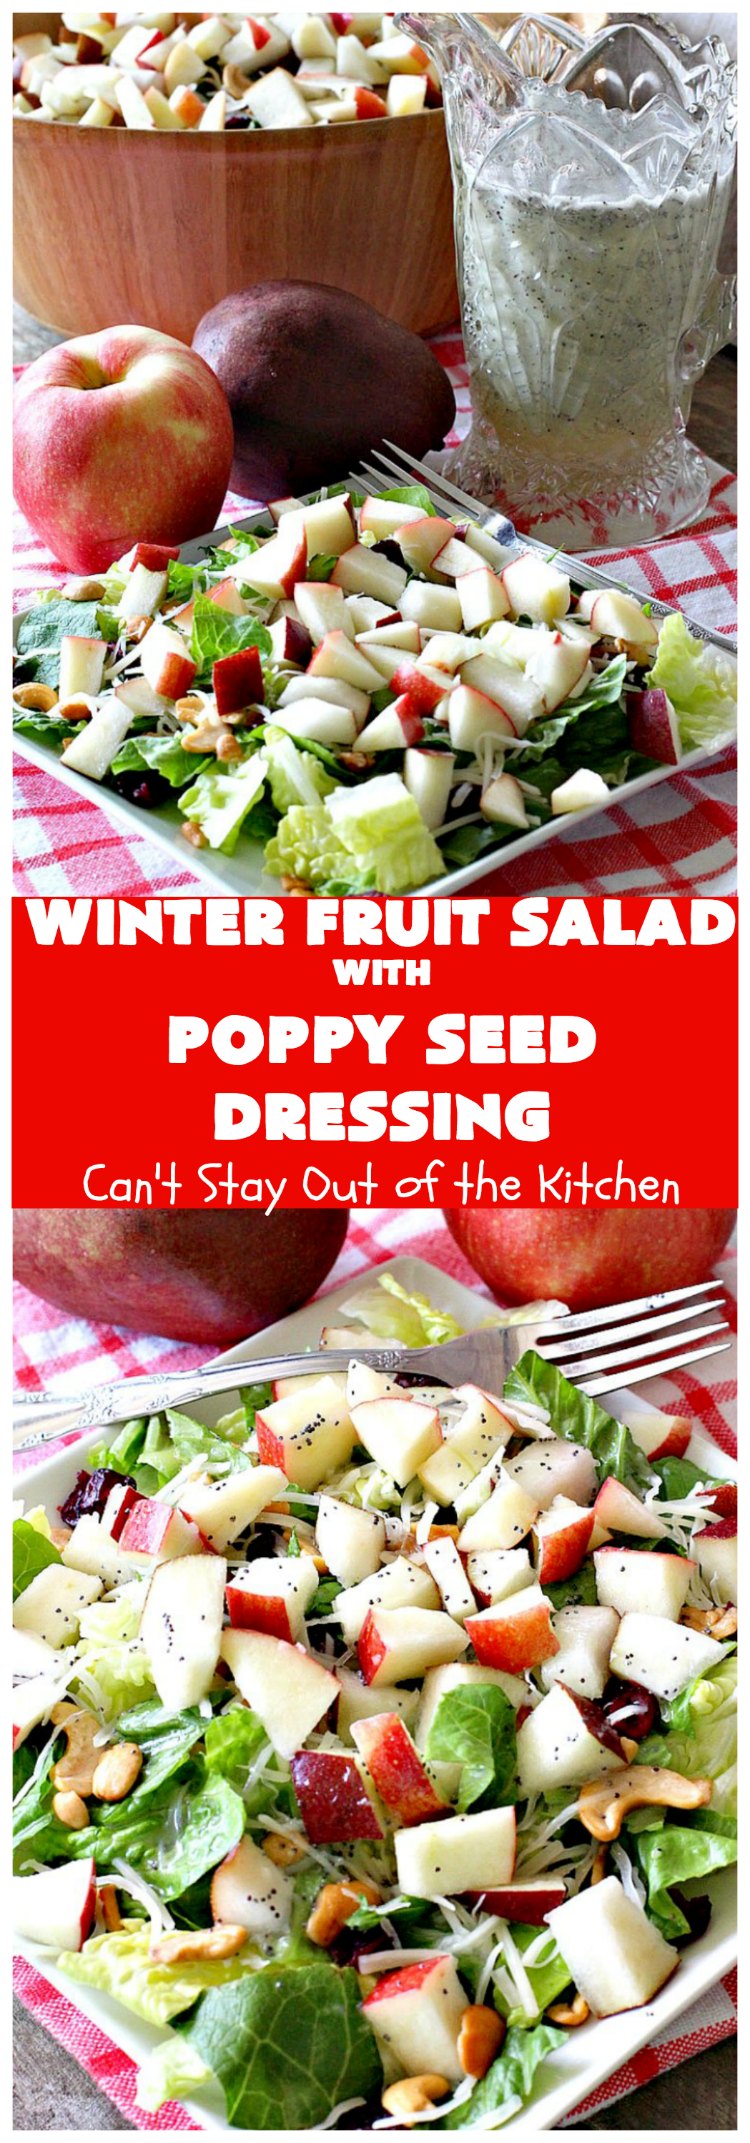 Winter Fruit Salad with Poppy Seed Dressing | Can't Stay Out of the Kitchen